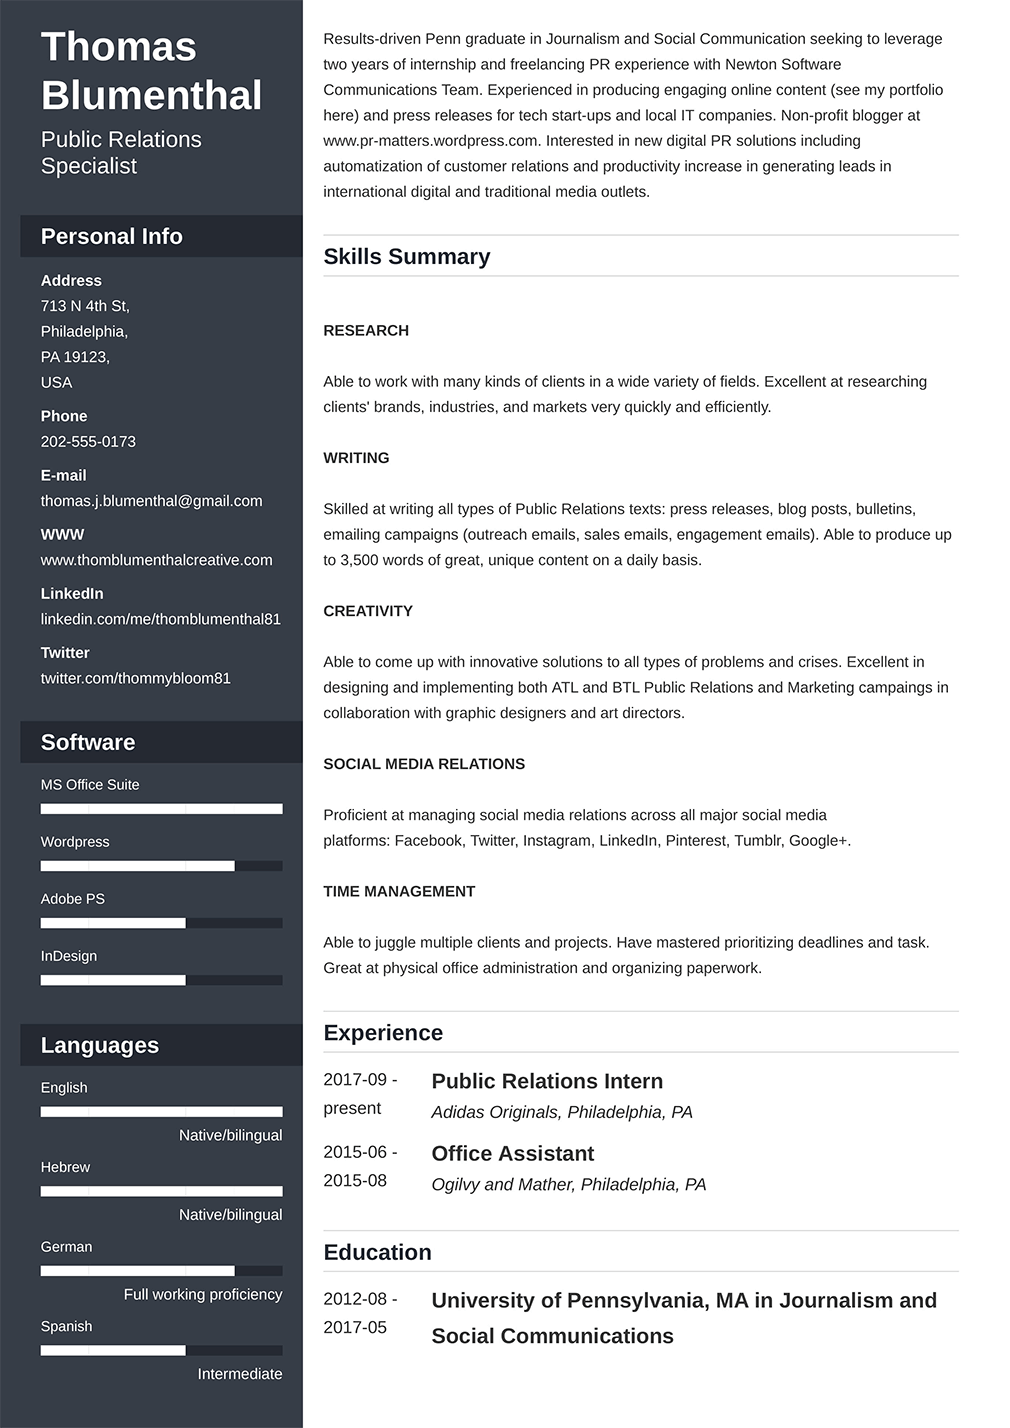 Curriculum Vitae Examples: 500+ Cv Samples For 2023